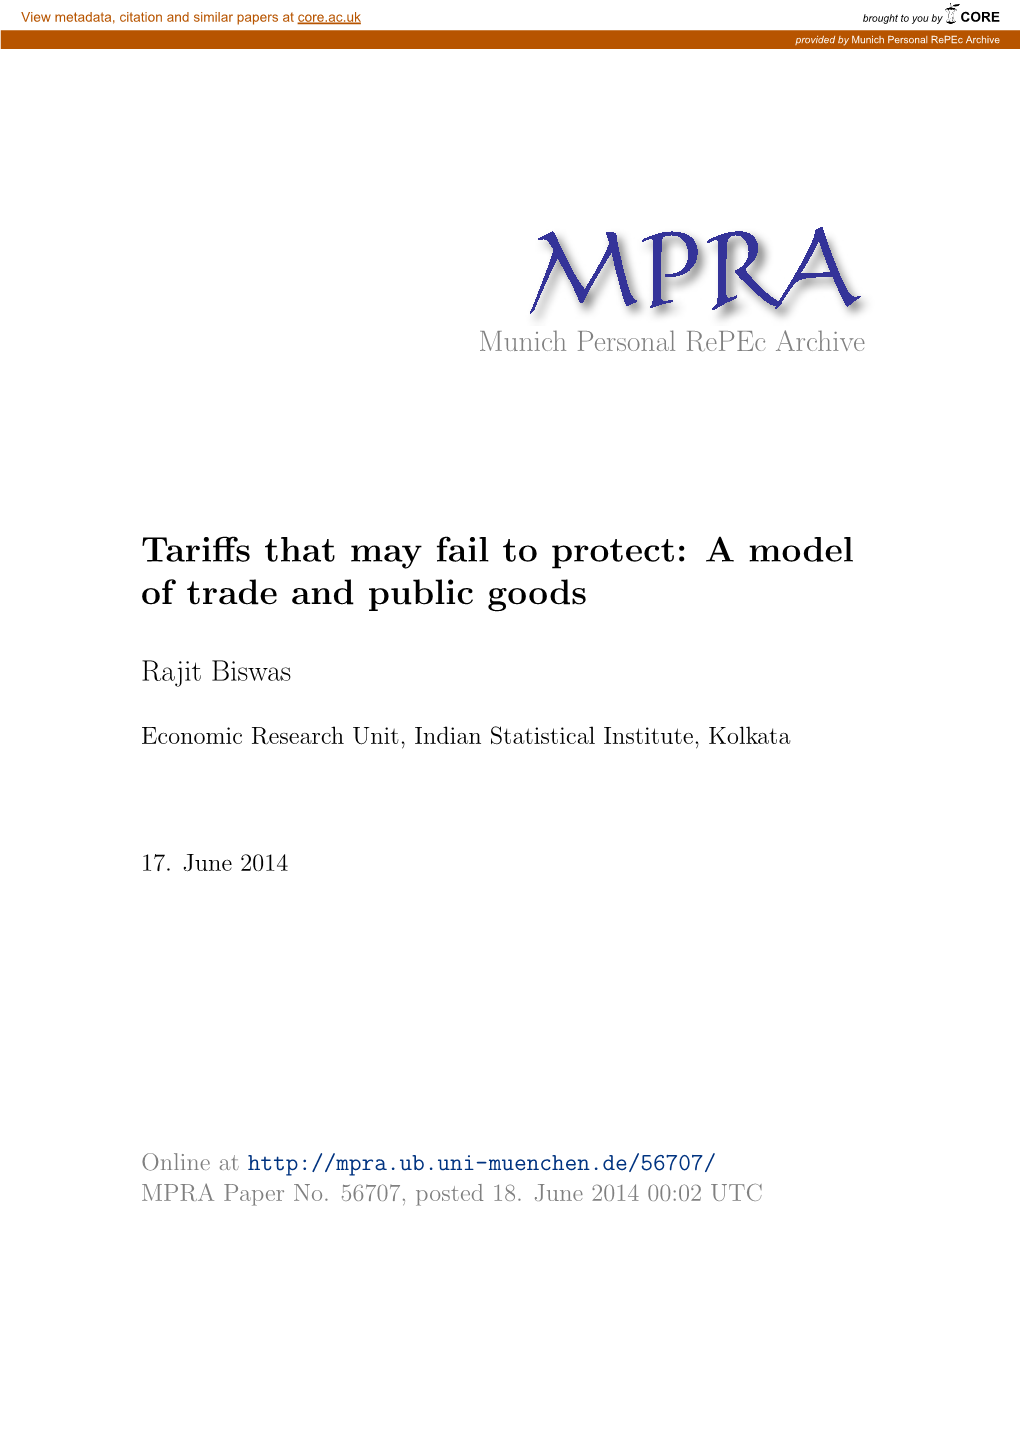 Tariffs That May Fail to Protect: a Model of Trade and Public Goods